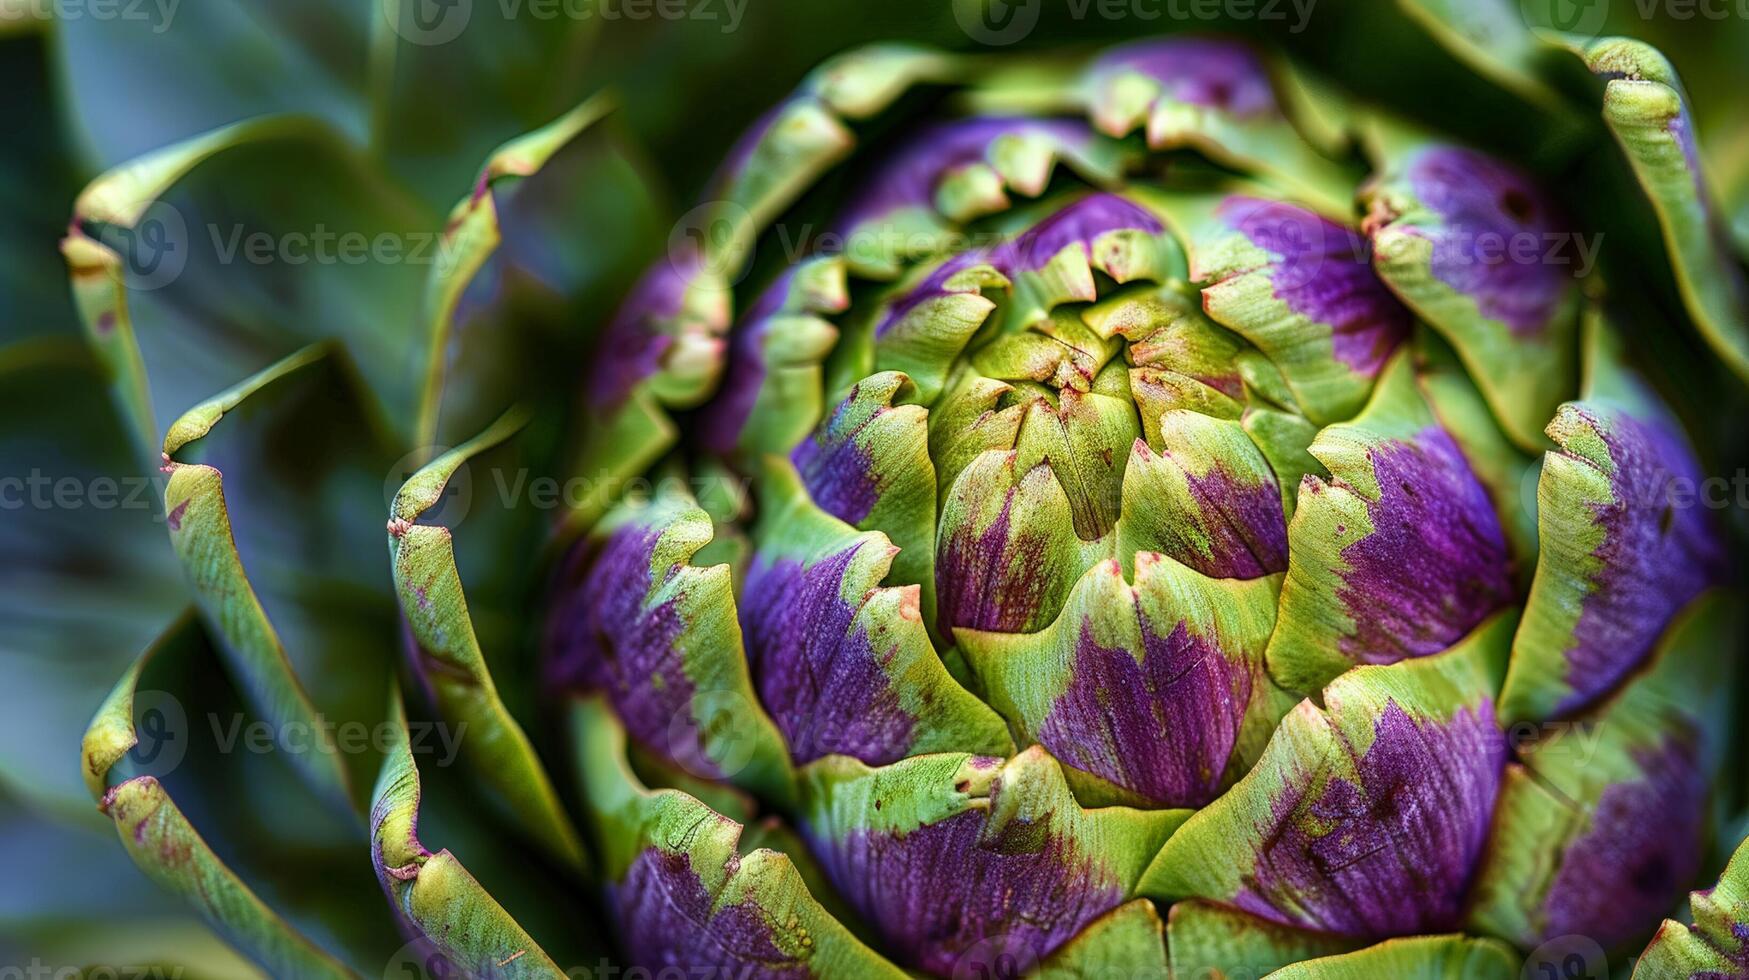 Abstract close up of an artichoke heart, vibrant greens and purples in a swirling pattern photo